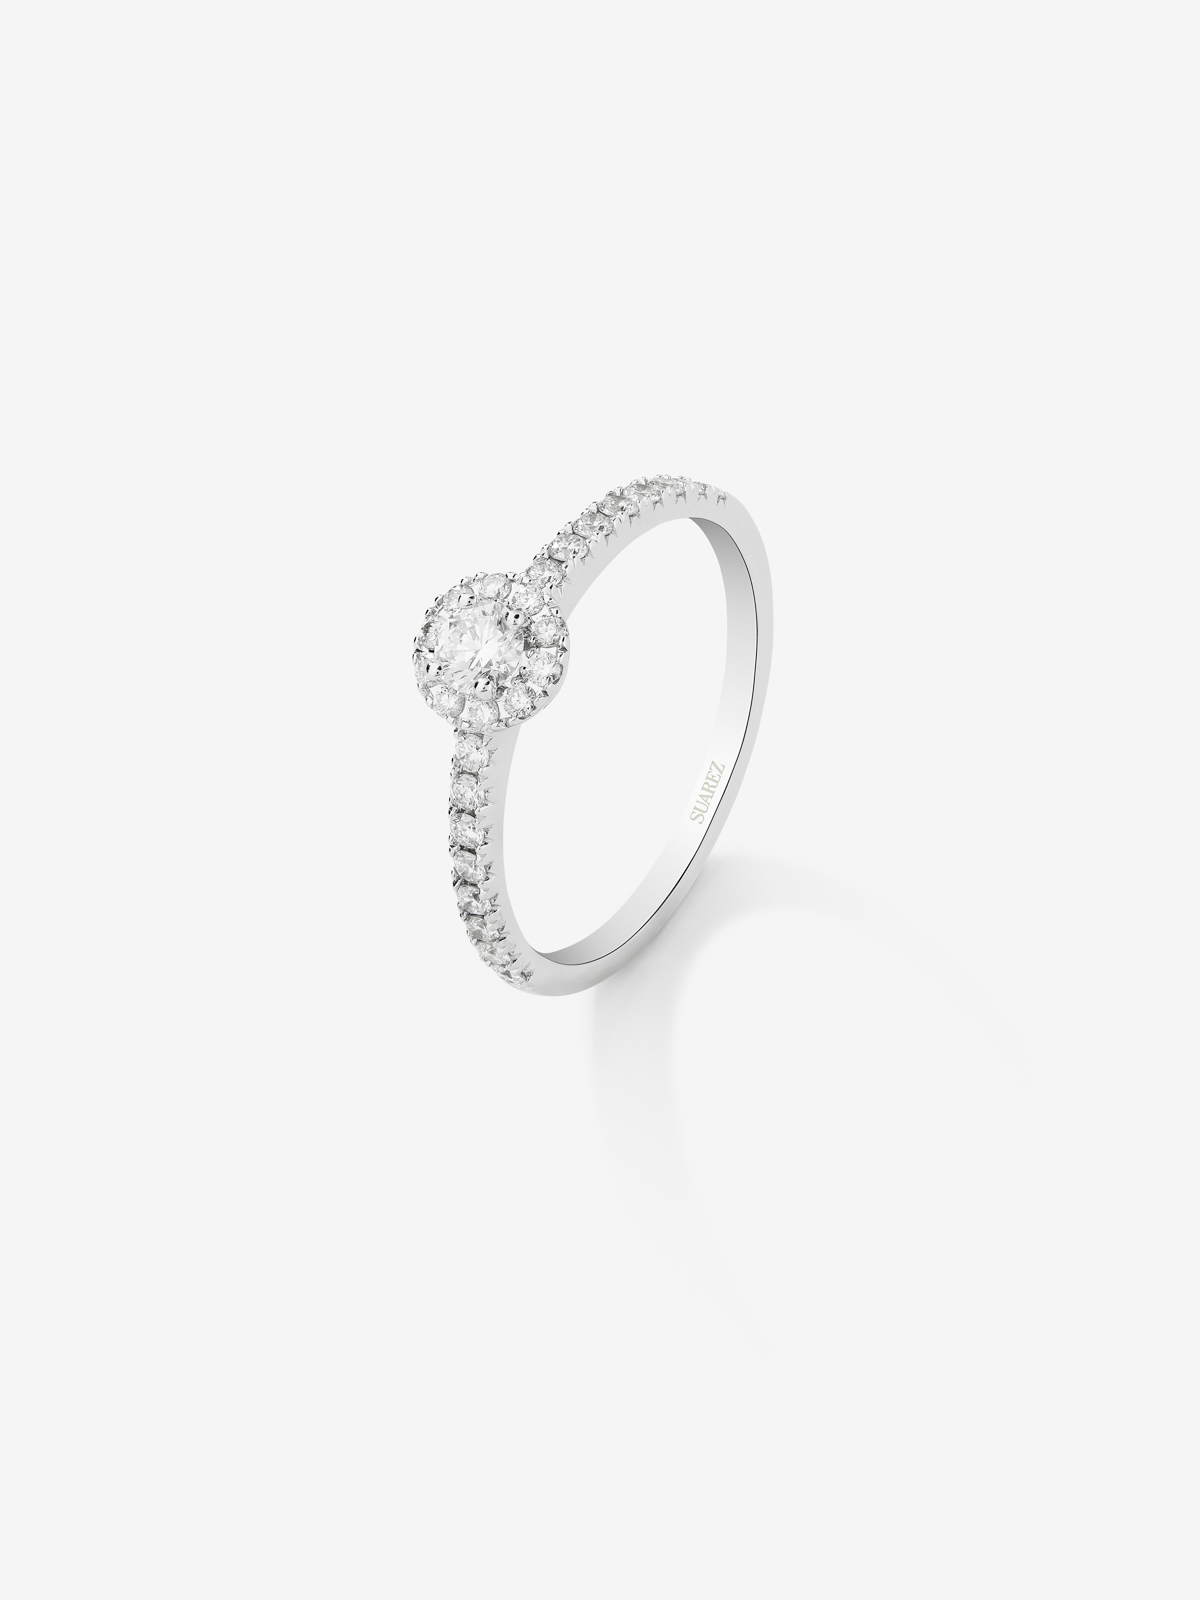 18K white gold solitary engagement ring with diamond halo